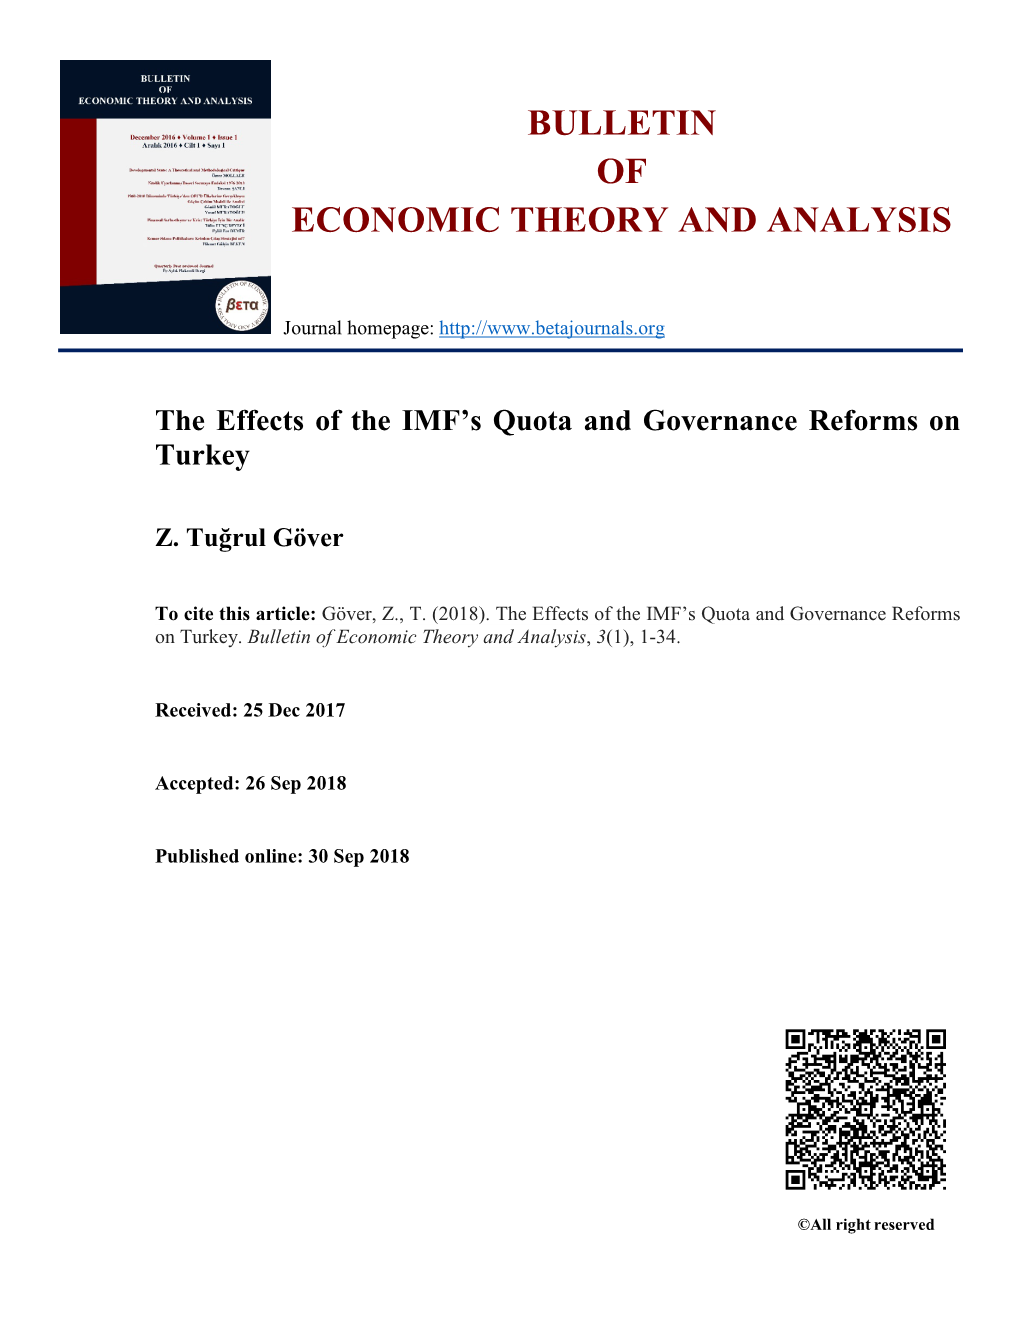 Bulletin of Economic Theory and Analysis